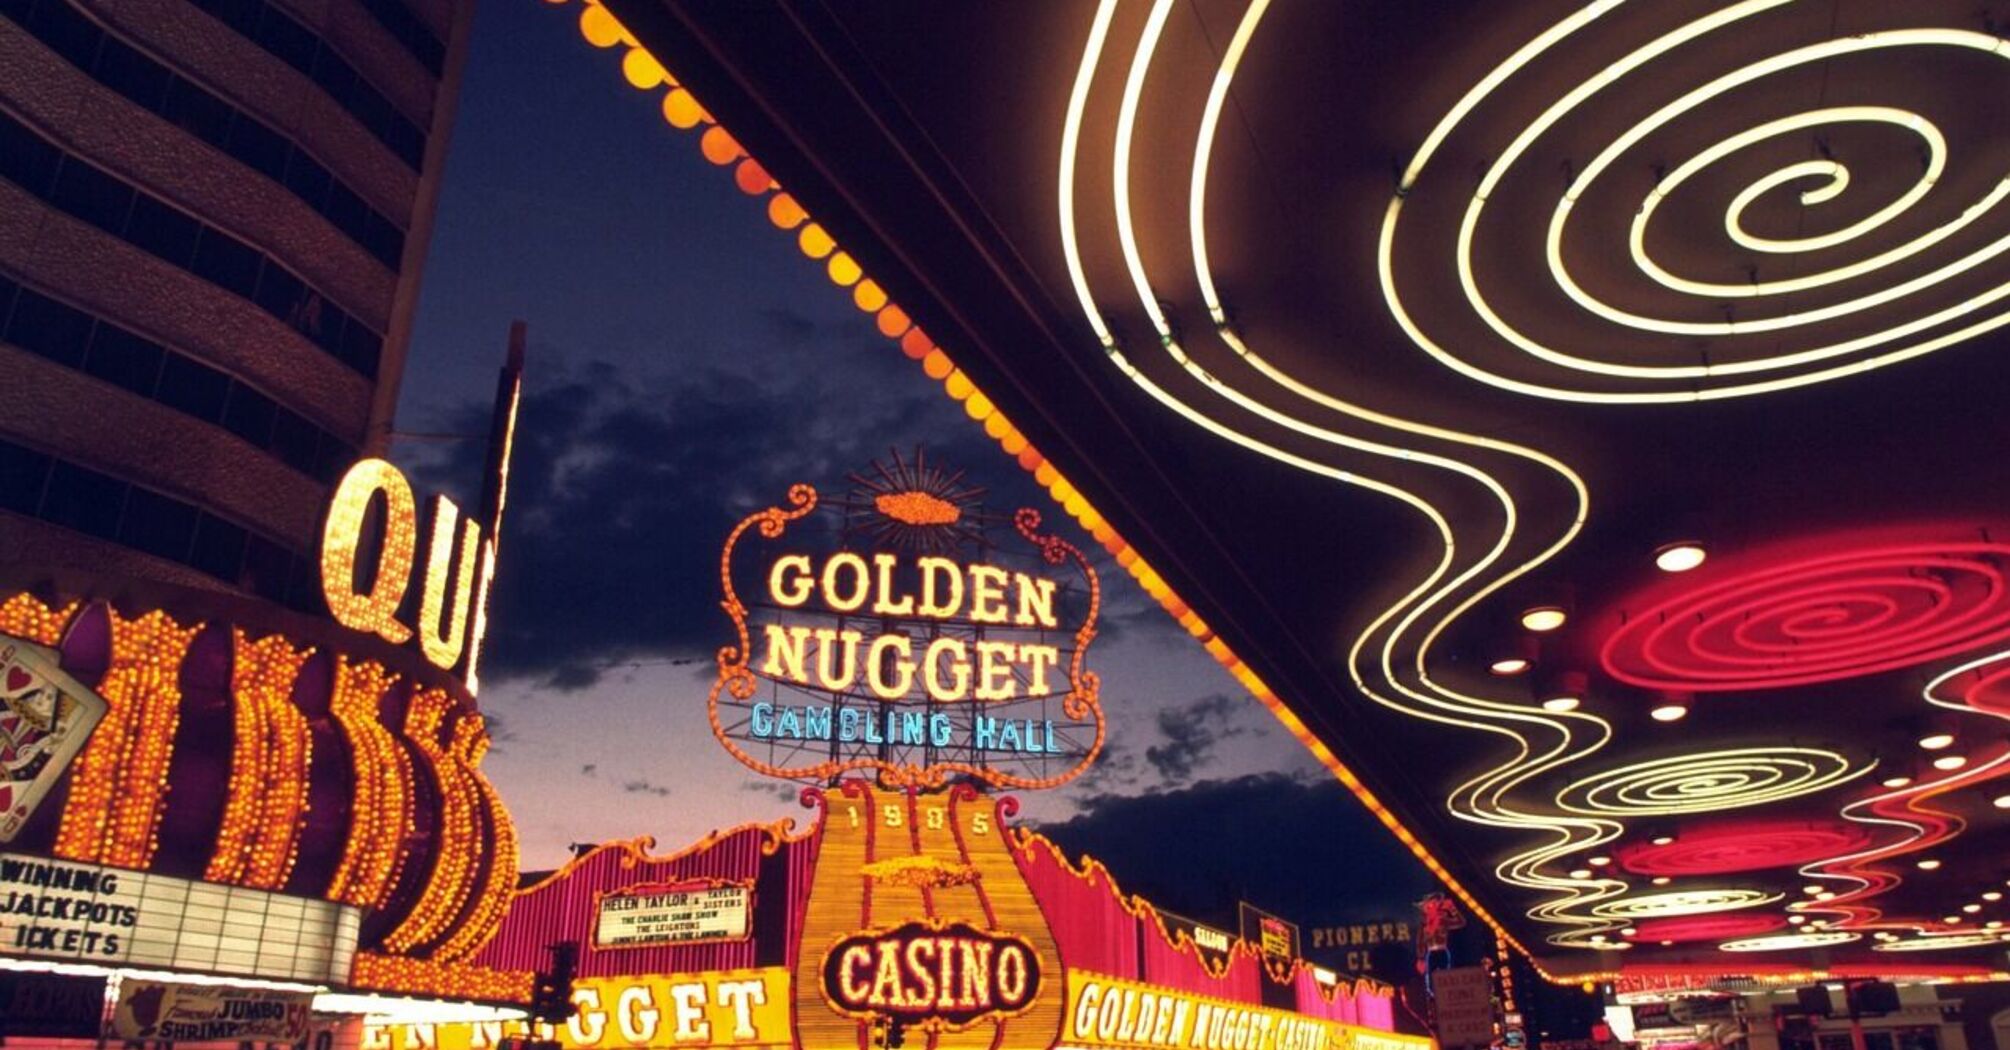 Stuff to do in Las Vegas for free: top 12 attractions